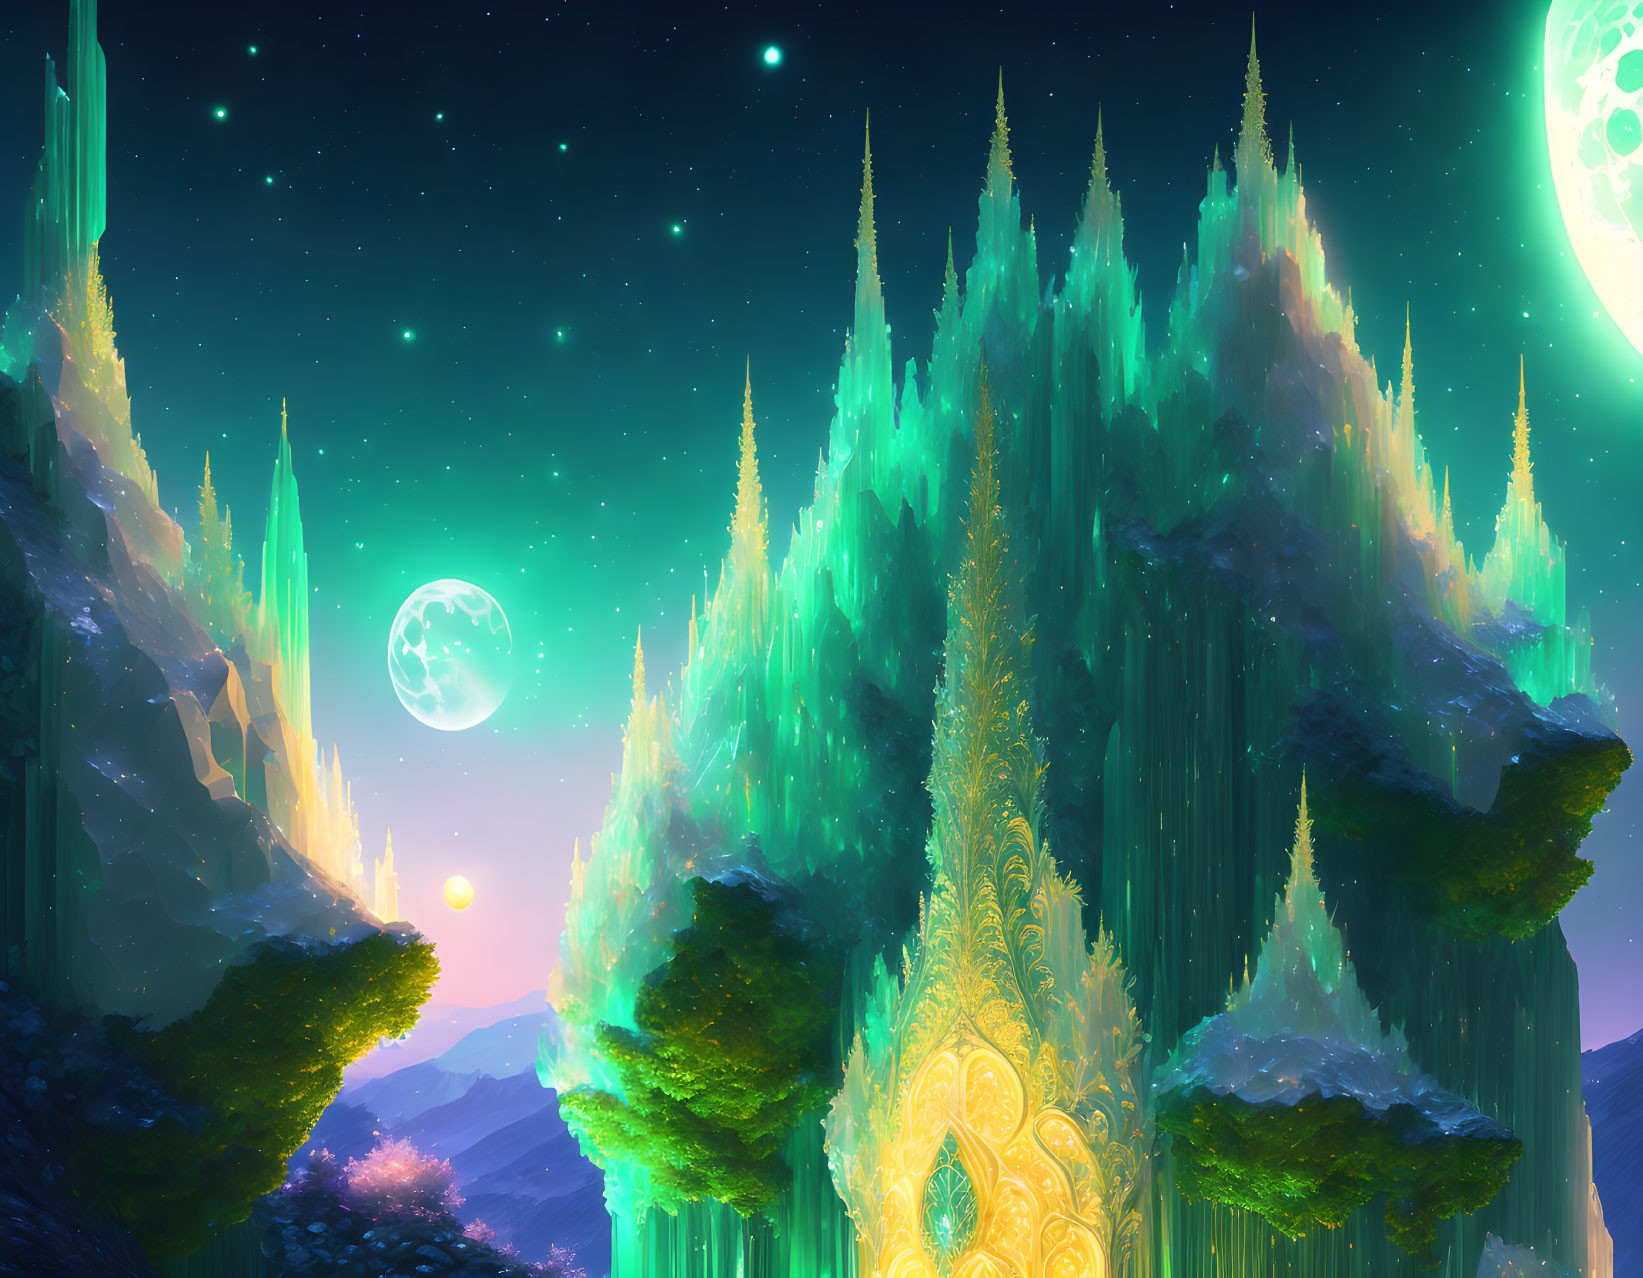 Ethereal fantasy landscape with luminescent trees, mountains, and moons